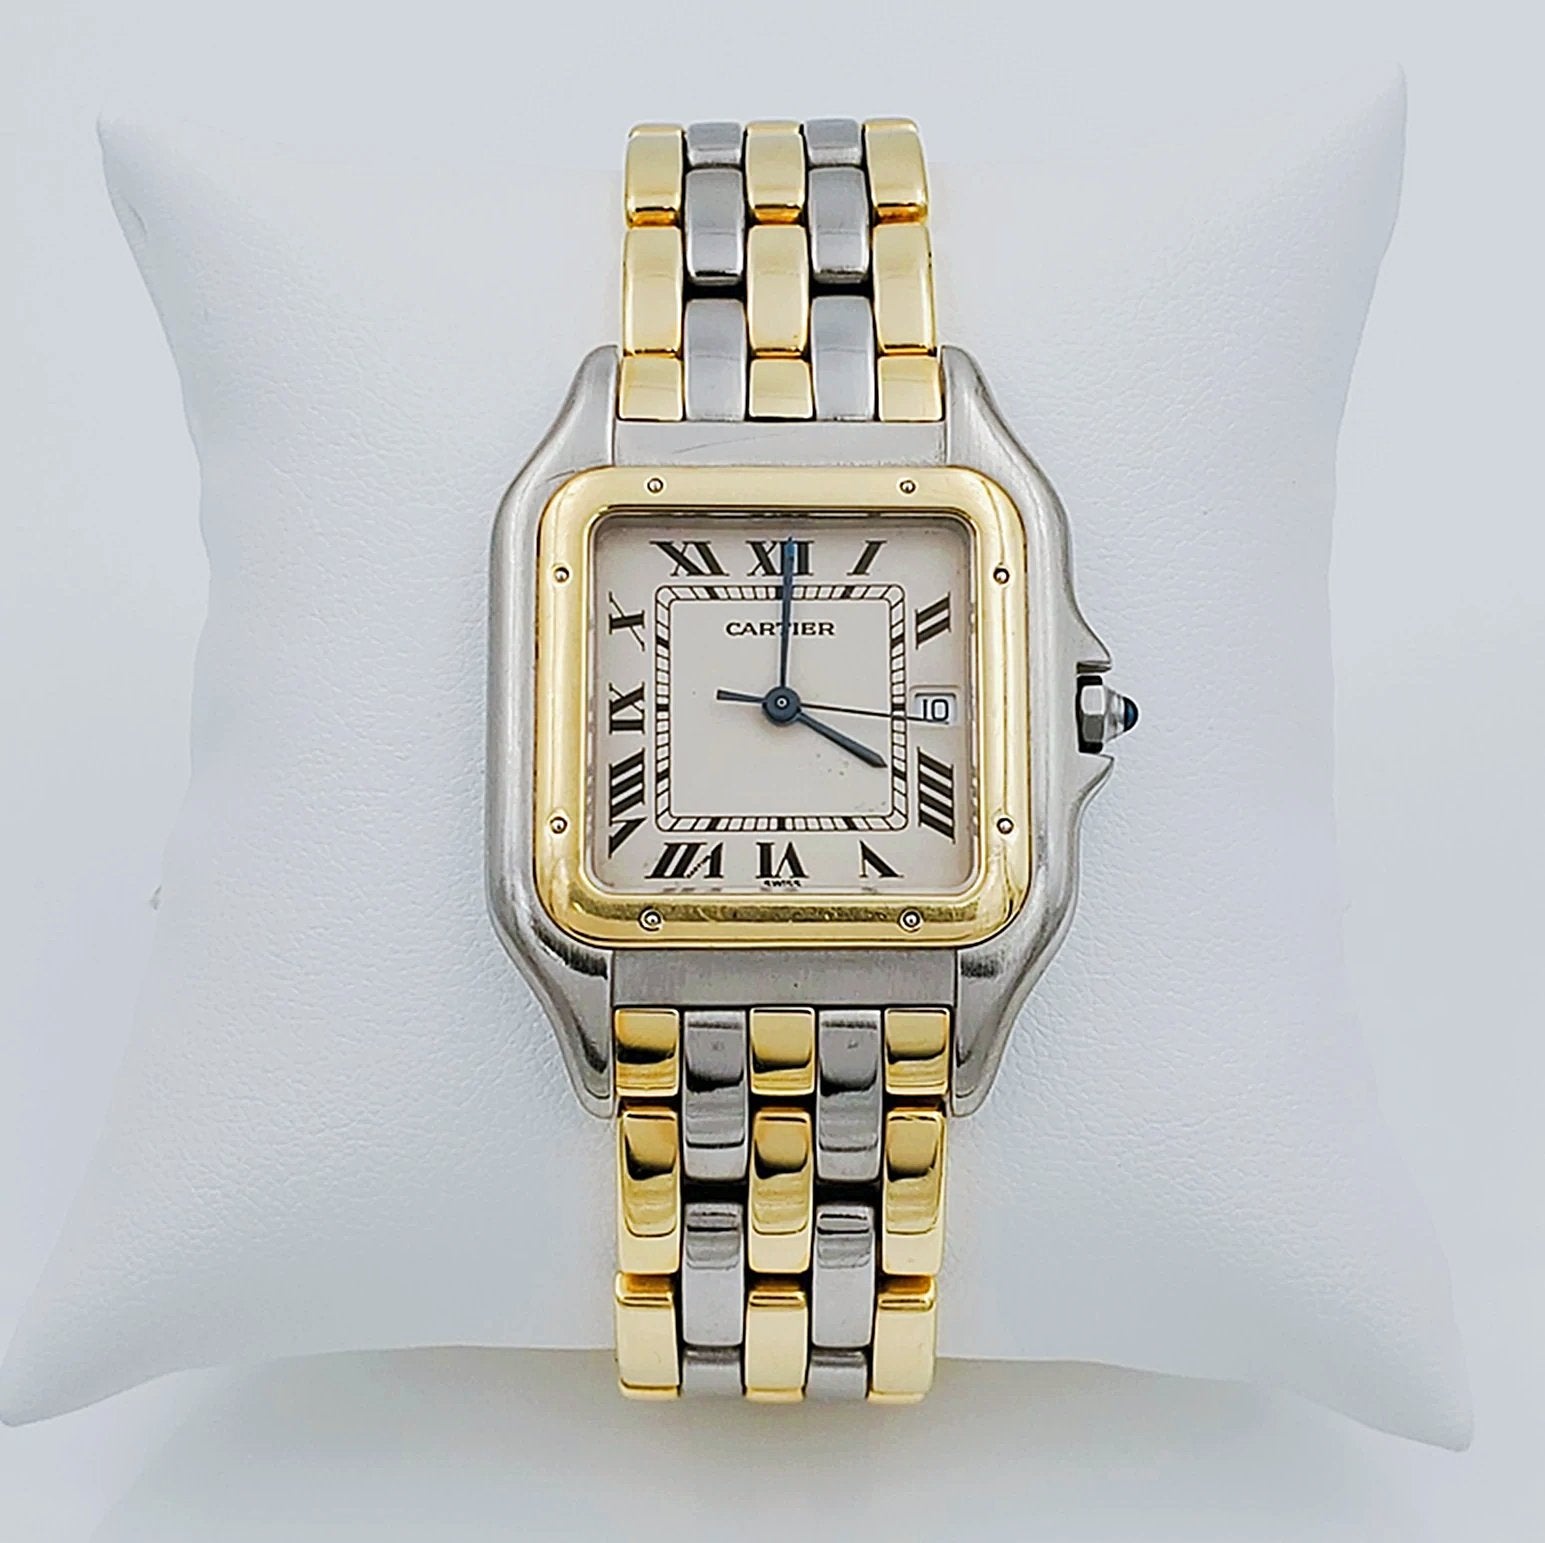 Men's Large Cartier Panthere Watch in 18K Yellow Gold and Stainless Steel, with White Dial. (Pre-Owned)